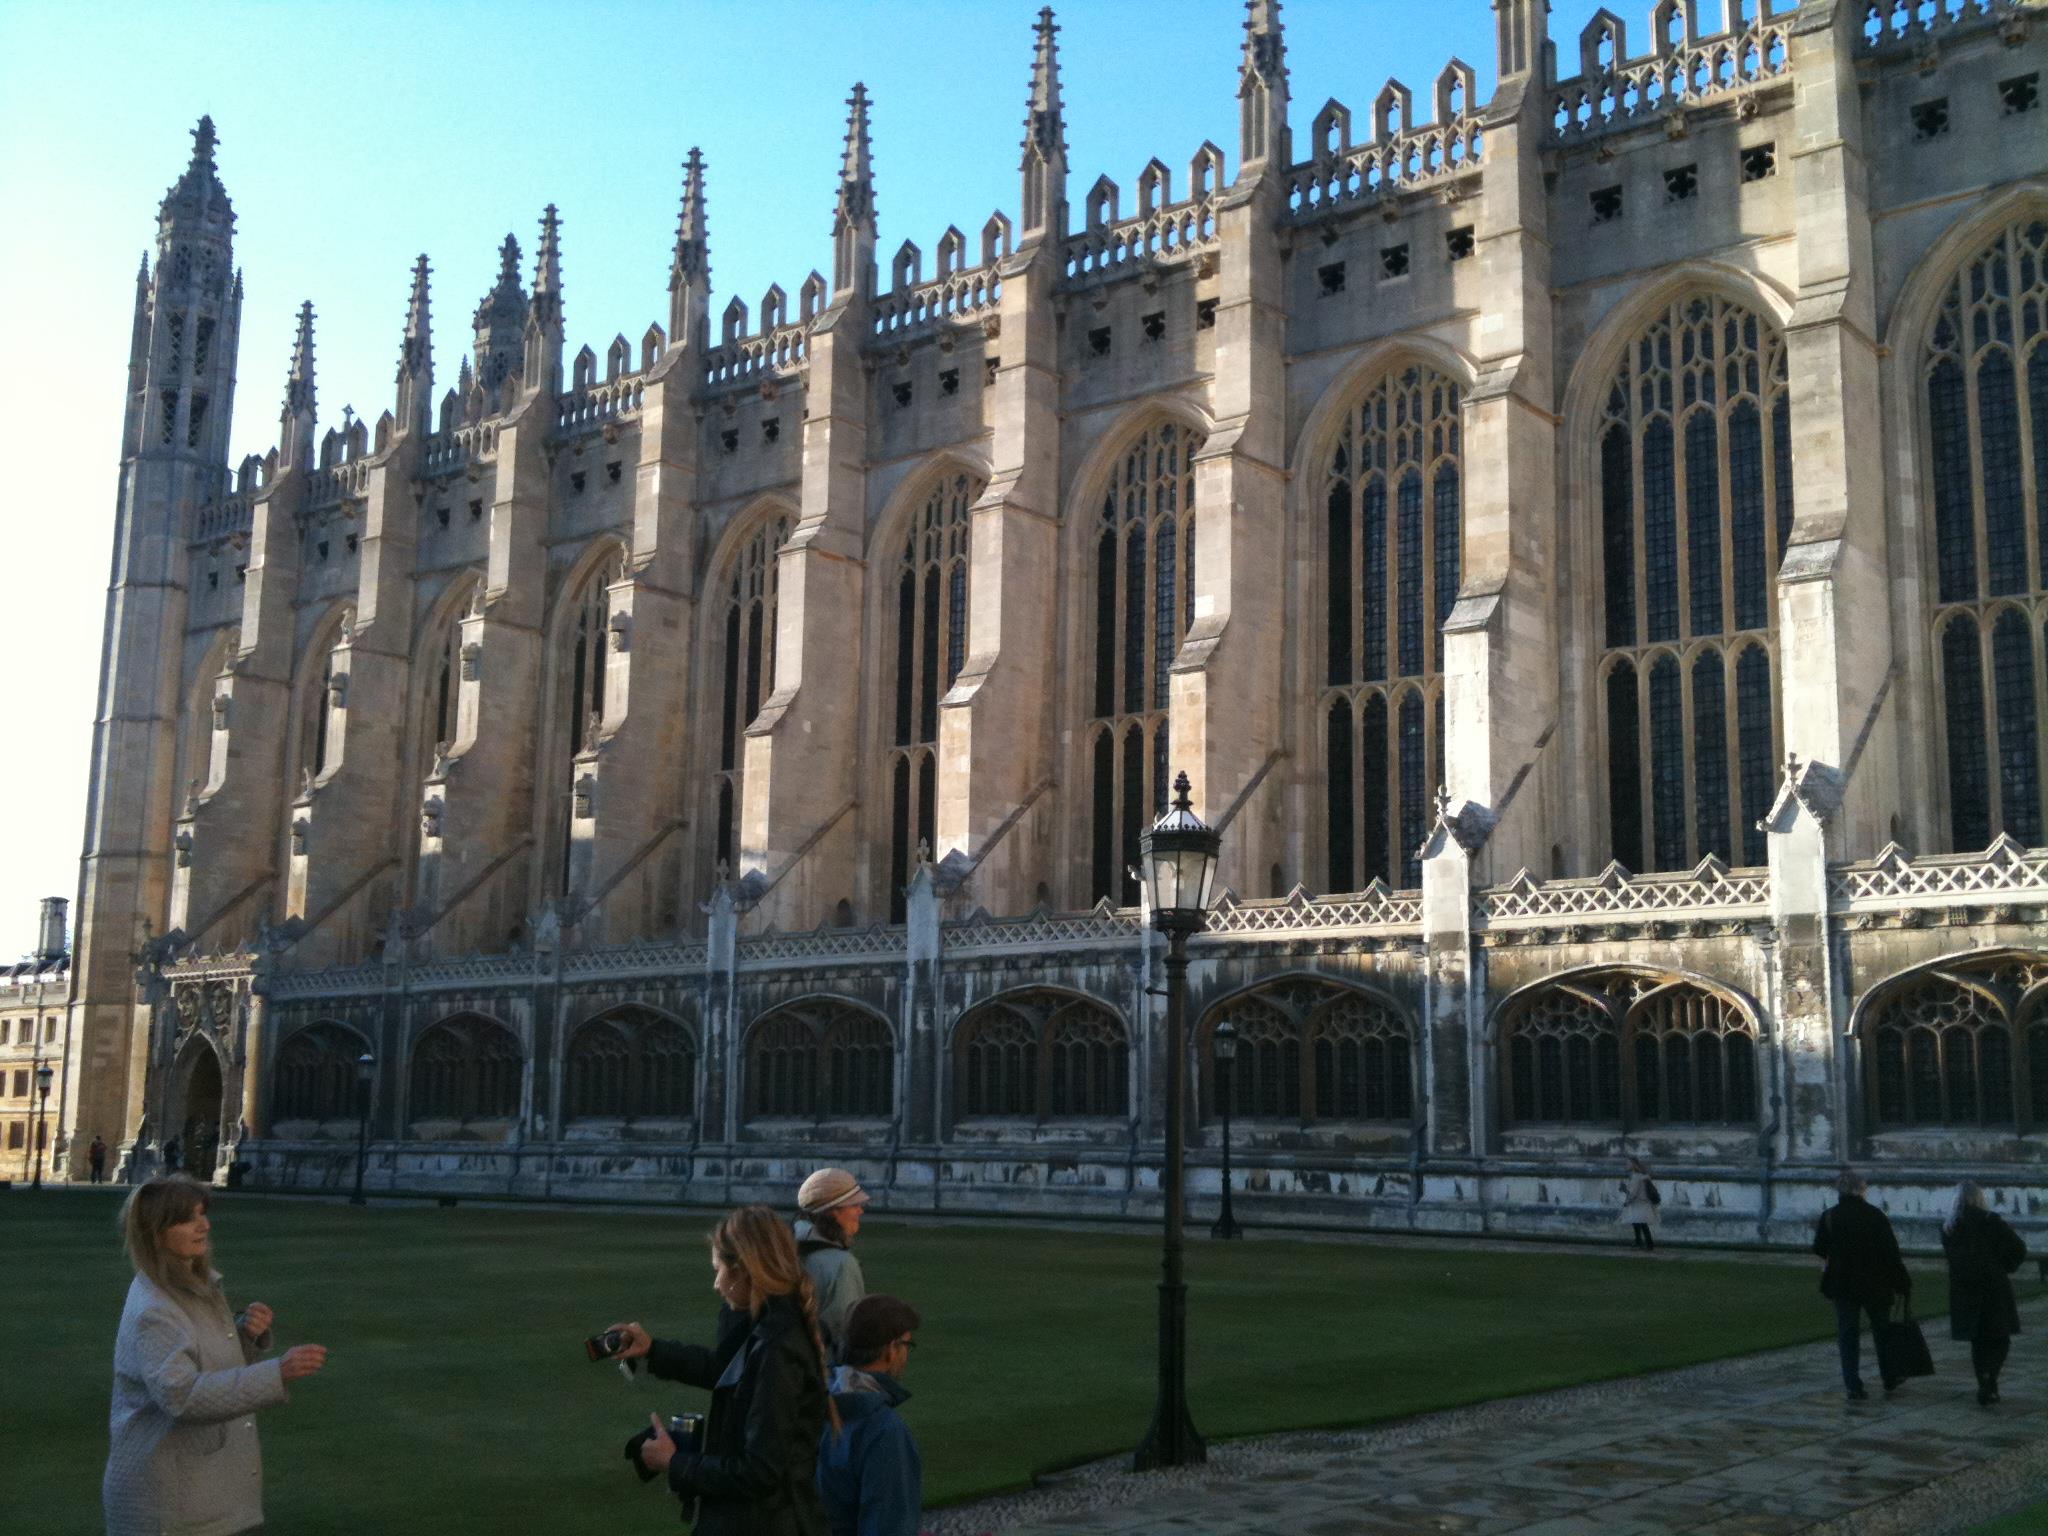 the exterior of Kings College